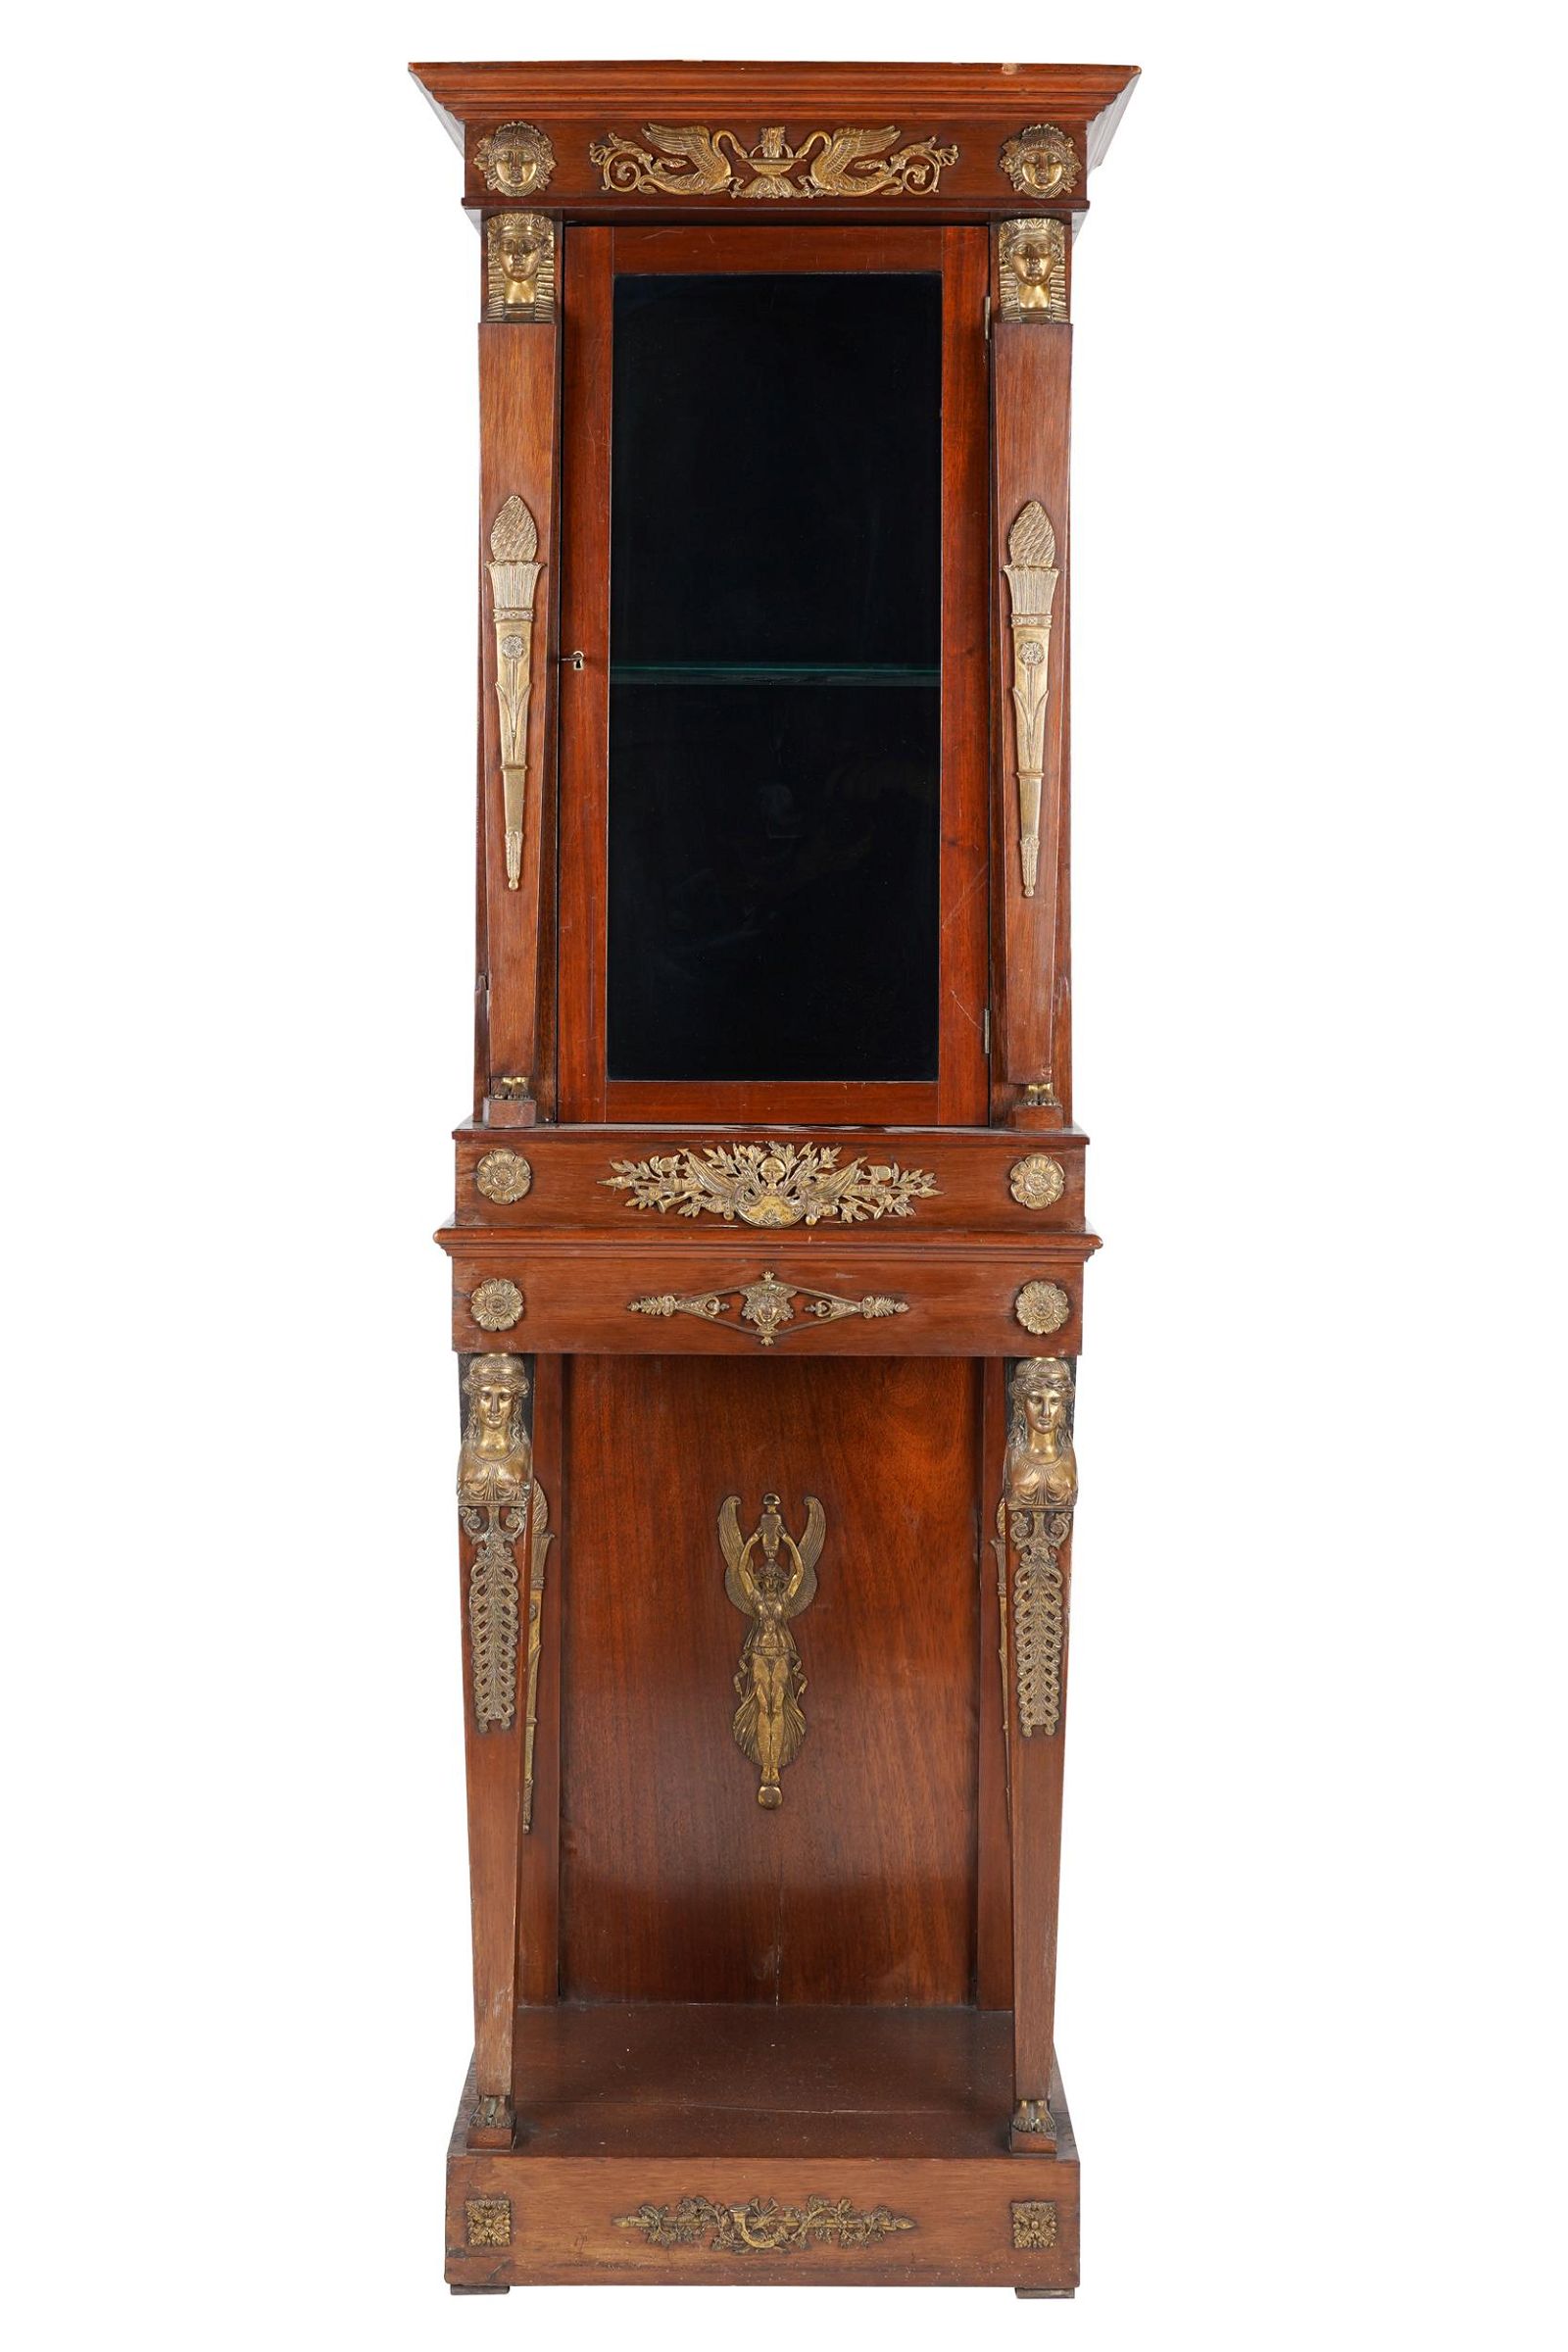 EMPIRE STYLE CABINET ON STANDin 397456